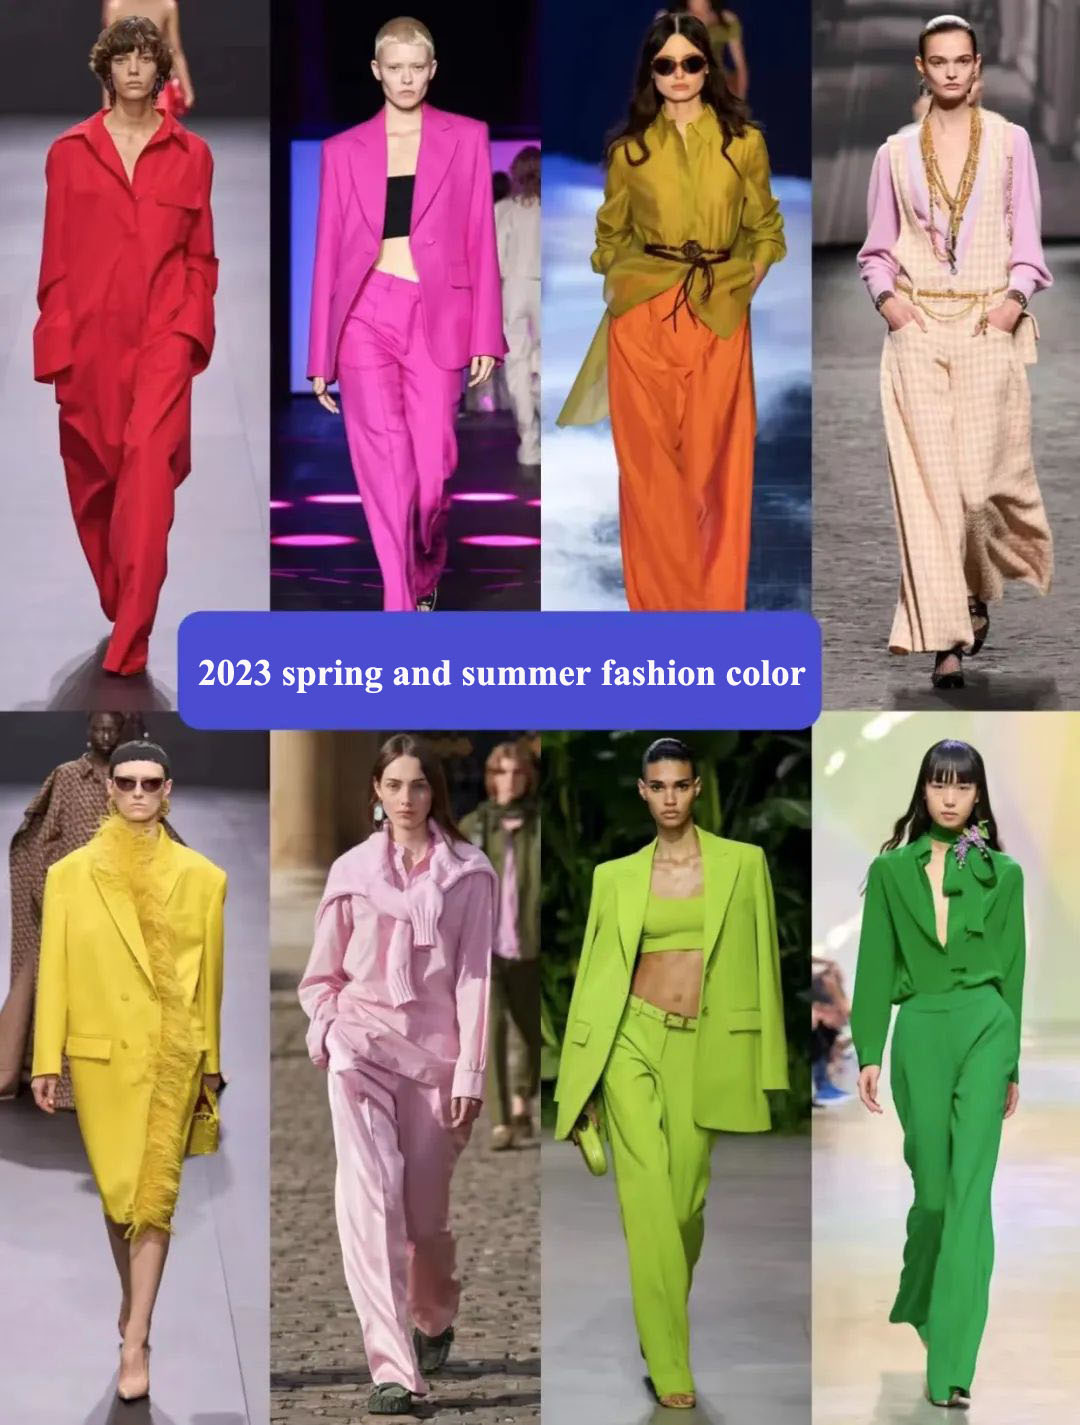 2023 spring and summer fashion color